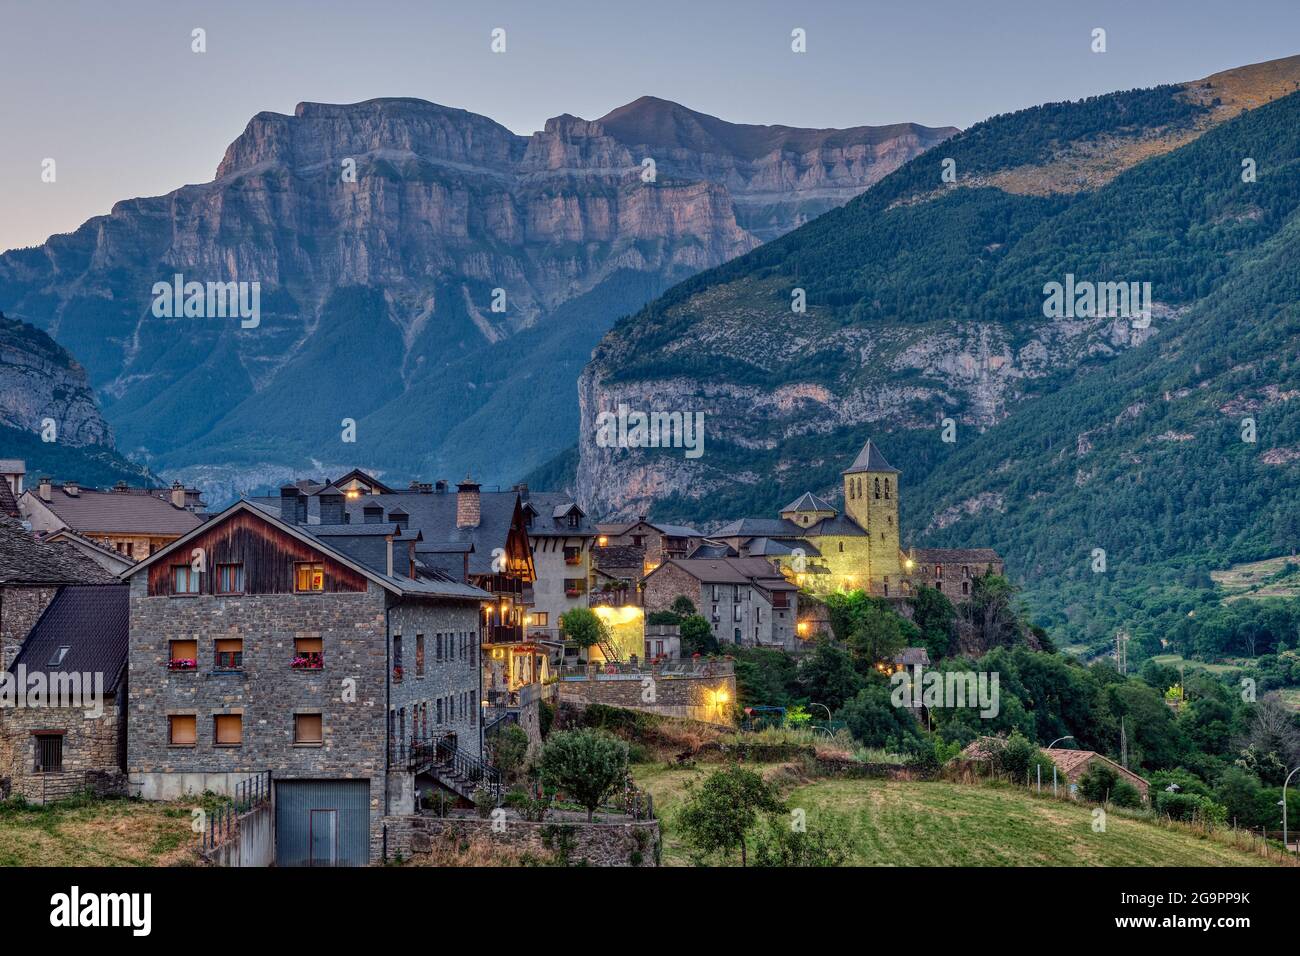 The beautiful village of Torla in the spanisch Pyrenees at night Stock Photo